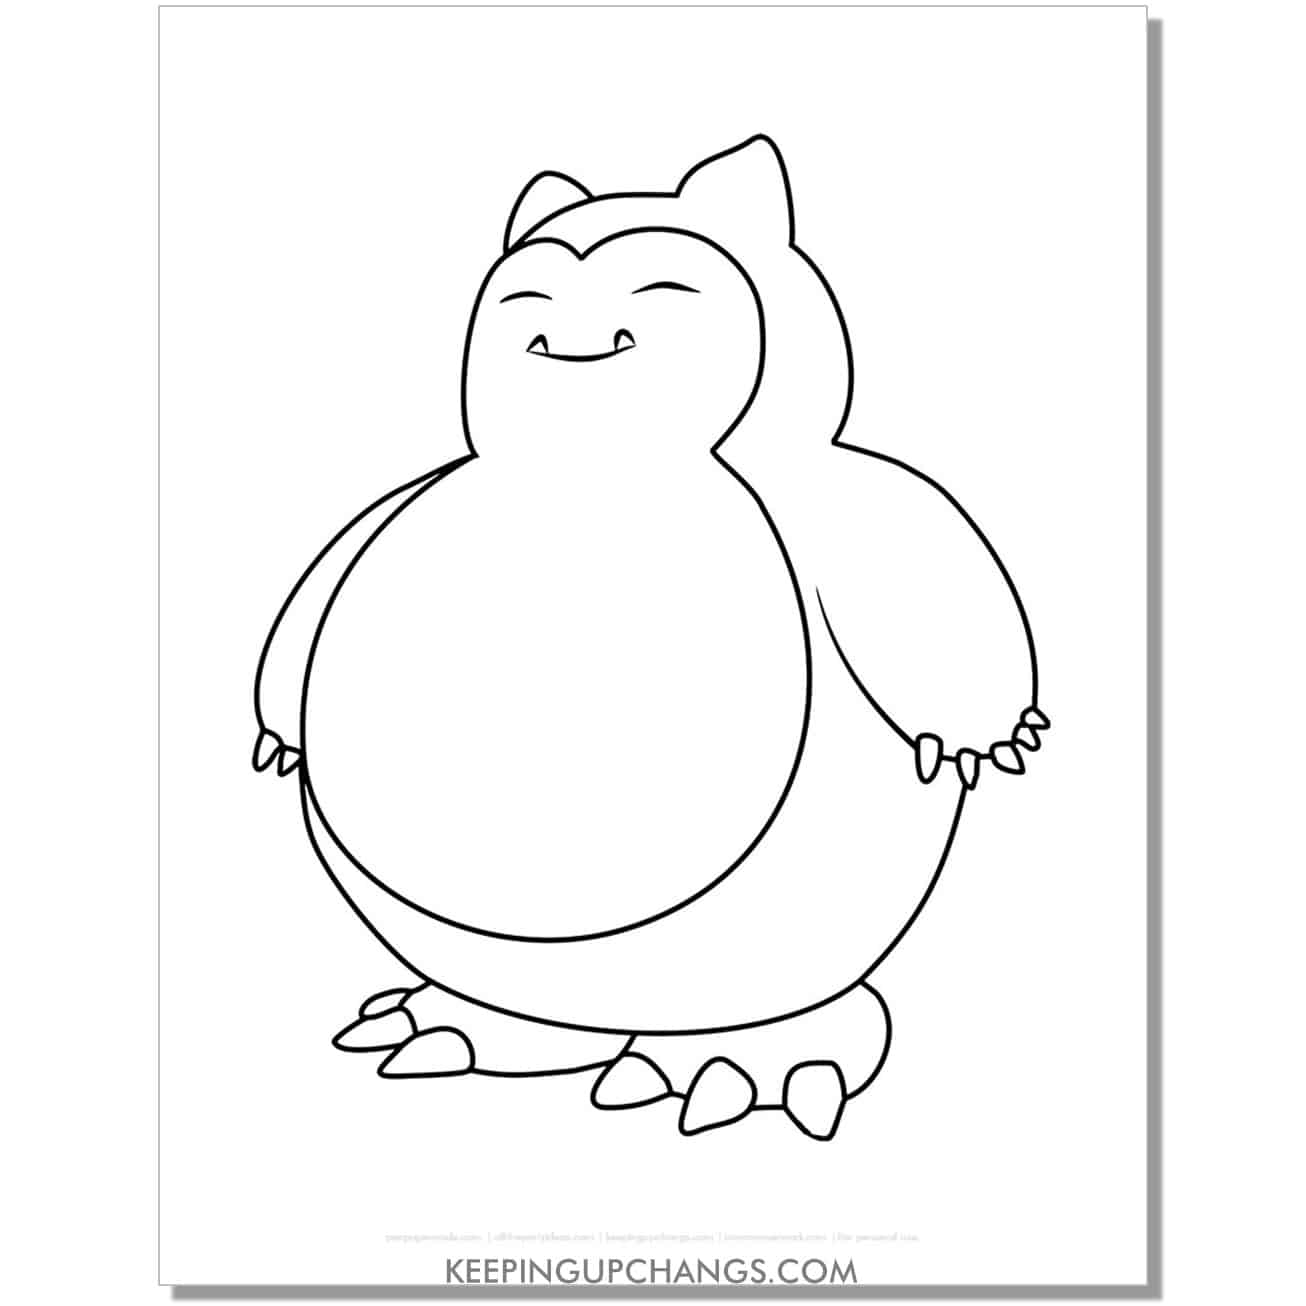 snorlax standing pokemon coloring page, sheet.